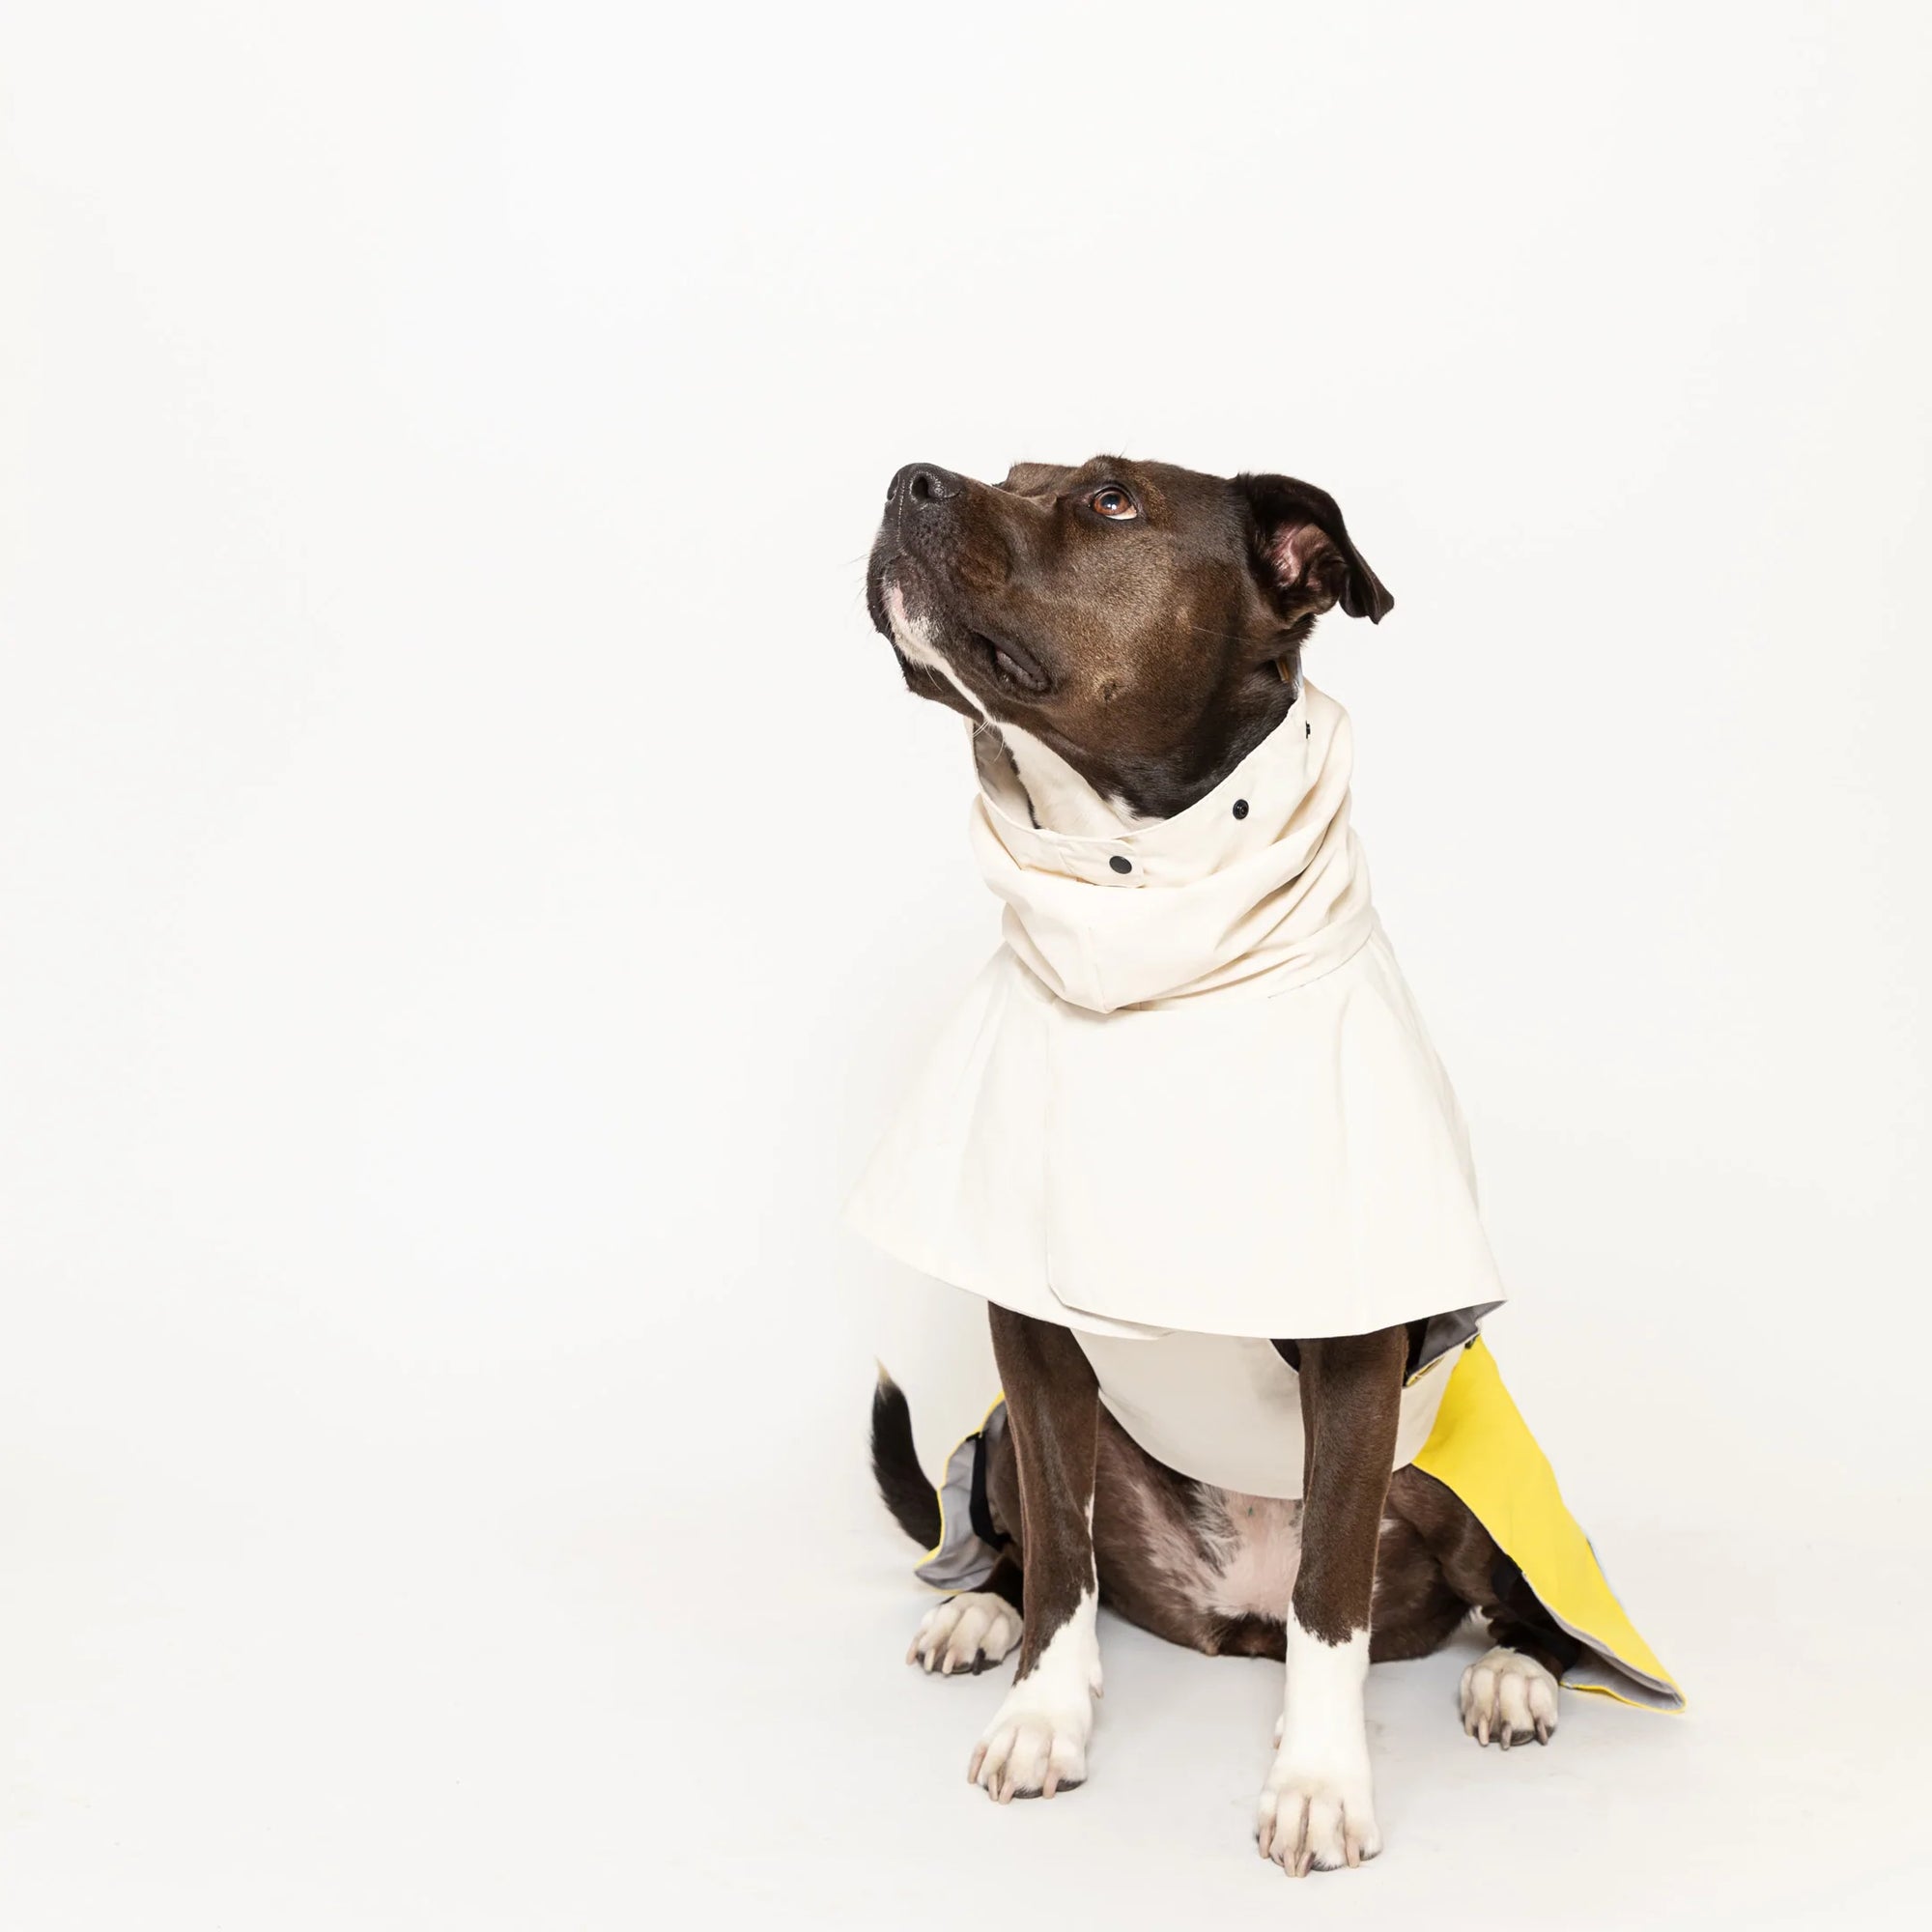 Brown and white dog gazing up while wearing a chic yellow-trimmed raincoat.